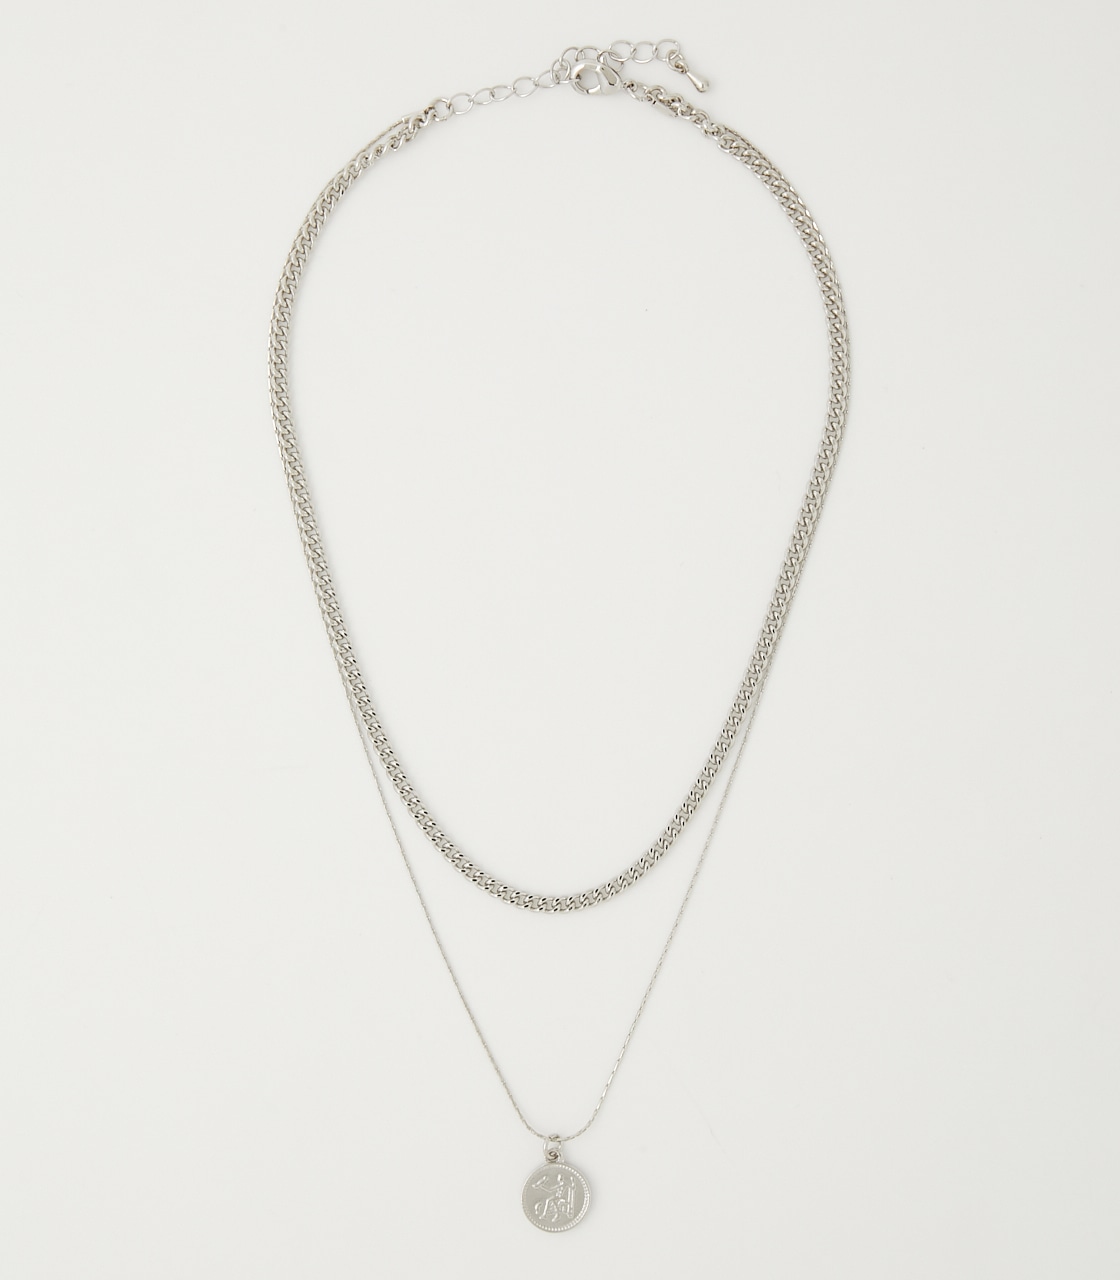 DOUBLE CHAIN COIN NECKLACE/ダブルチェーンコインネックレス 詳細画像 SLV 1